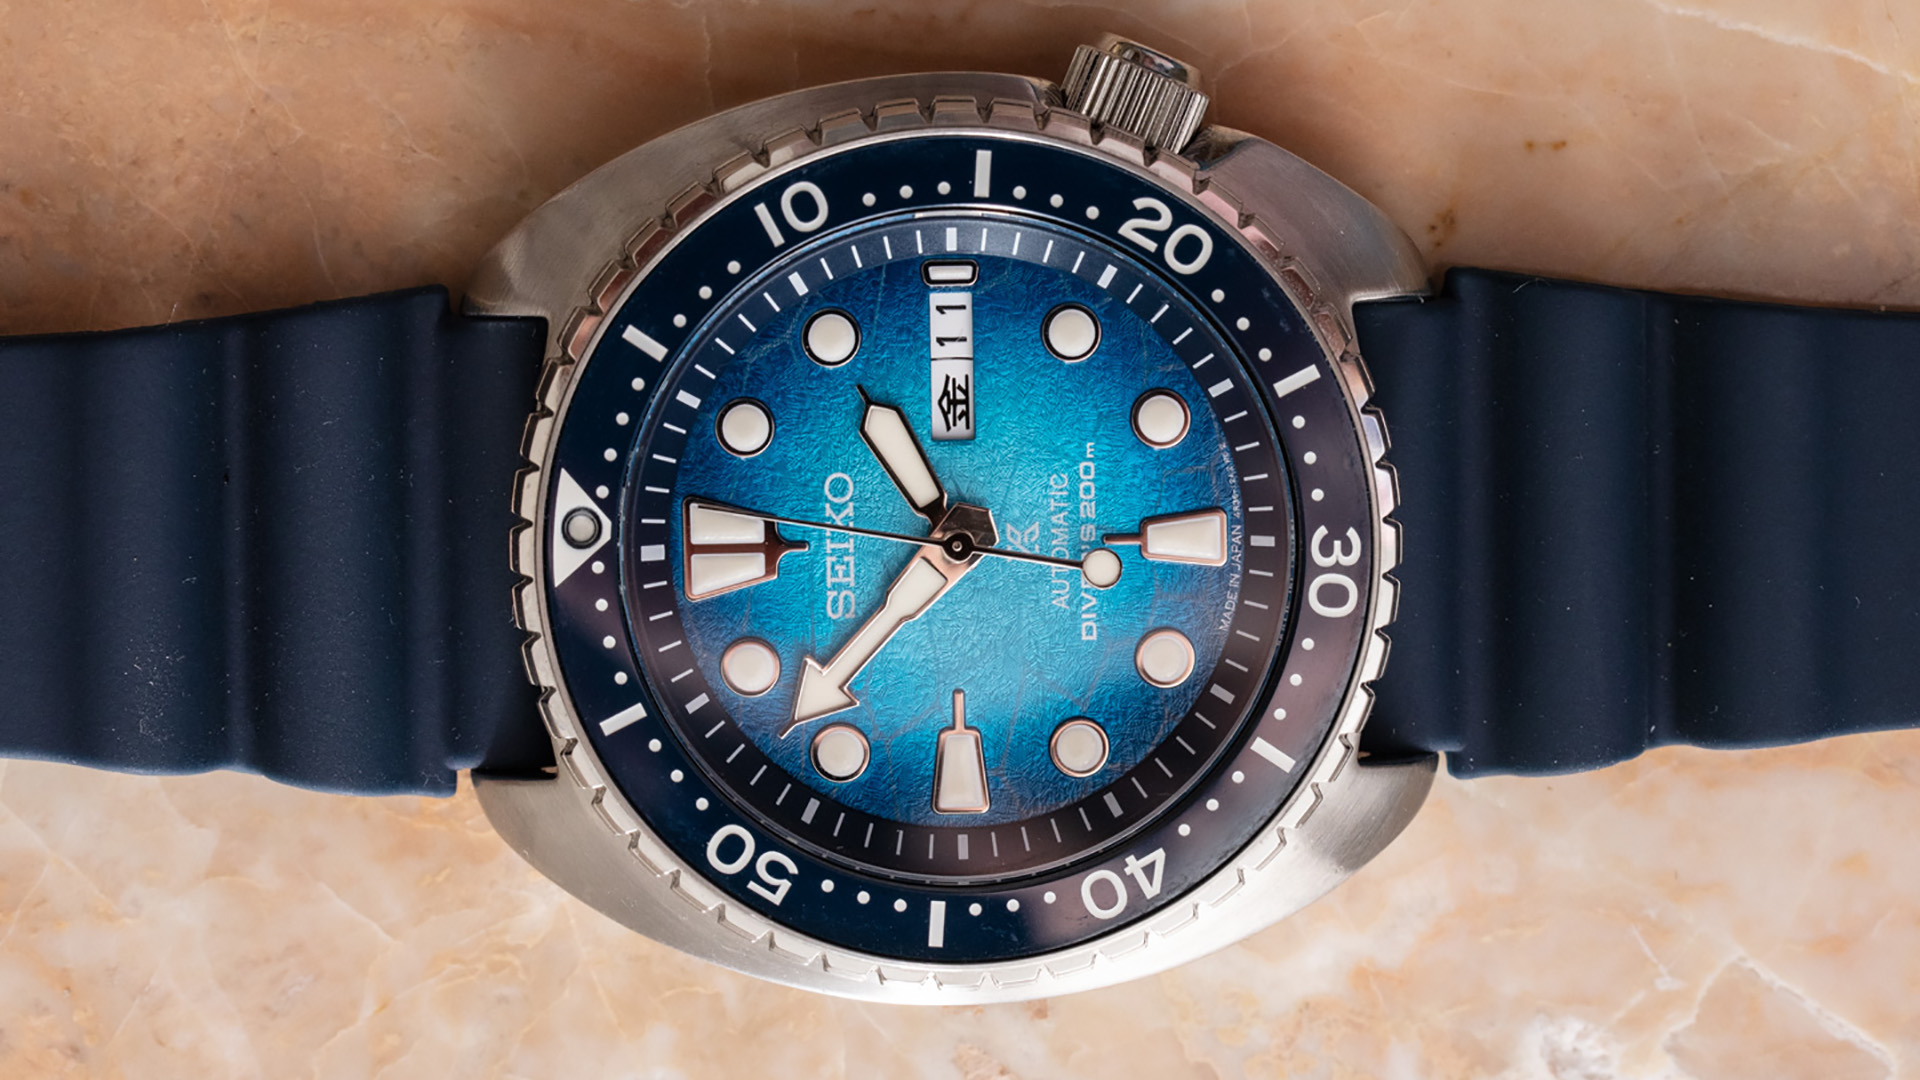 Watch Review: Seiko Prospex . Special Edition SRPH55, SRPH57, And SRPH59  | aBlogtoWatch